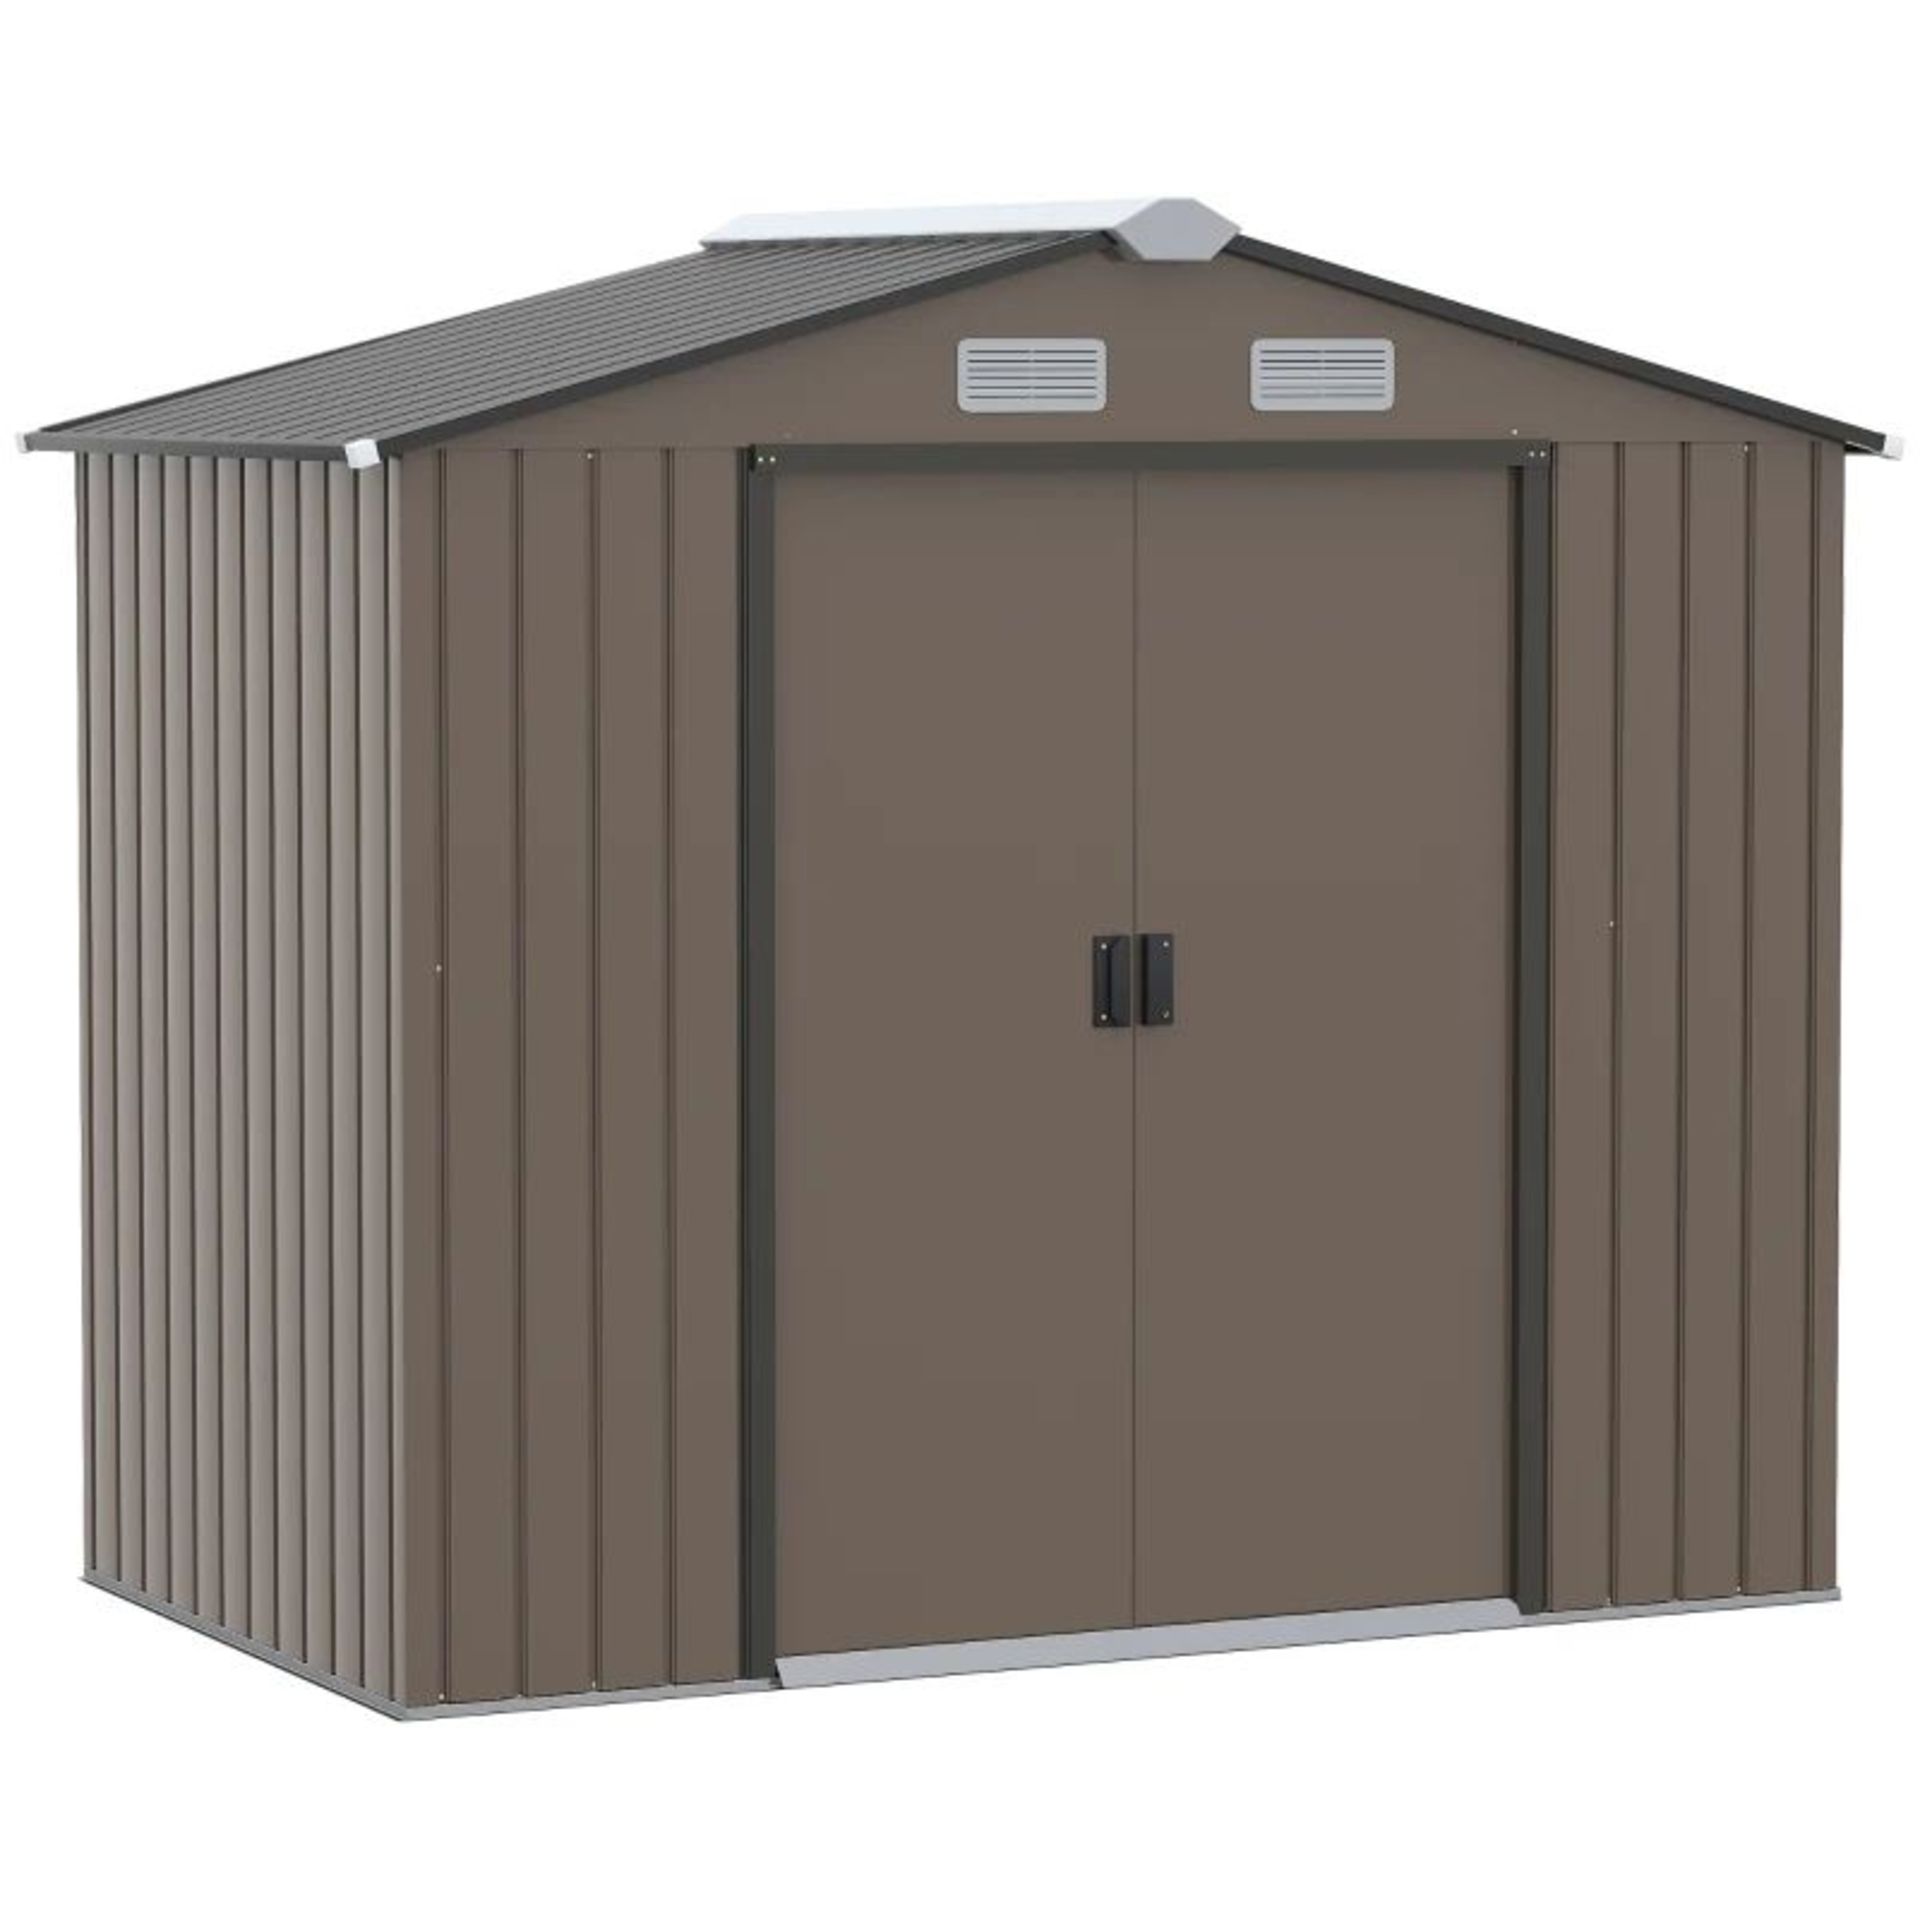 Outsunny 7 x 4ft Garden Metal Storage Shed, Outdoor Storage Tool House with Ventilation Slots, Floor